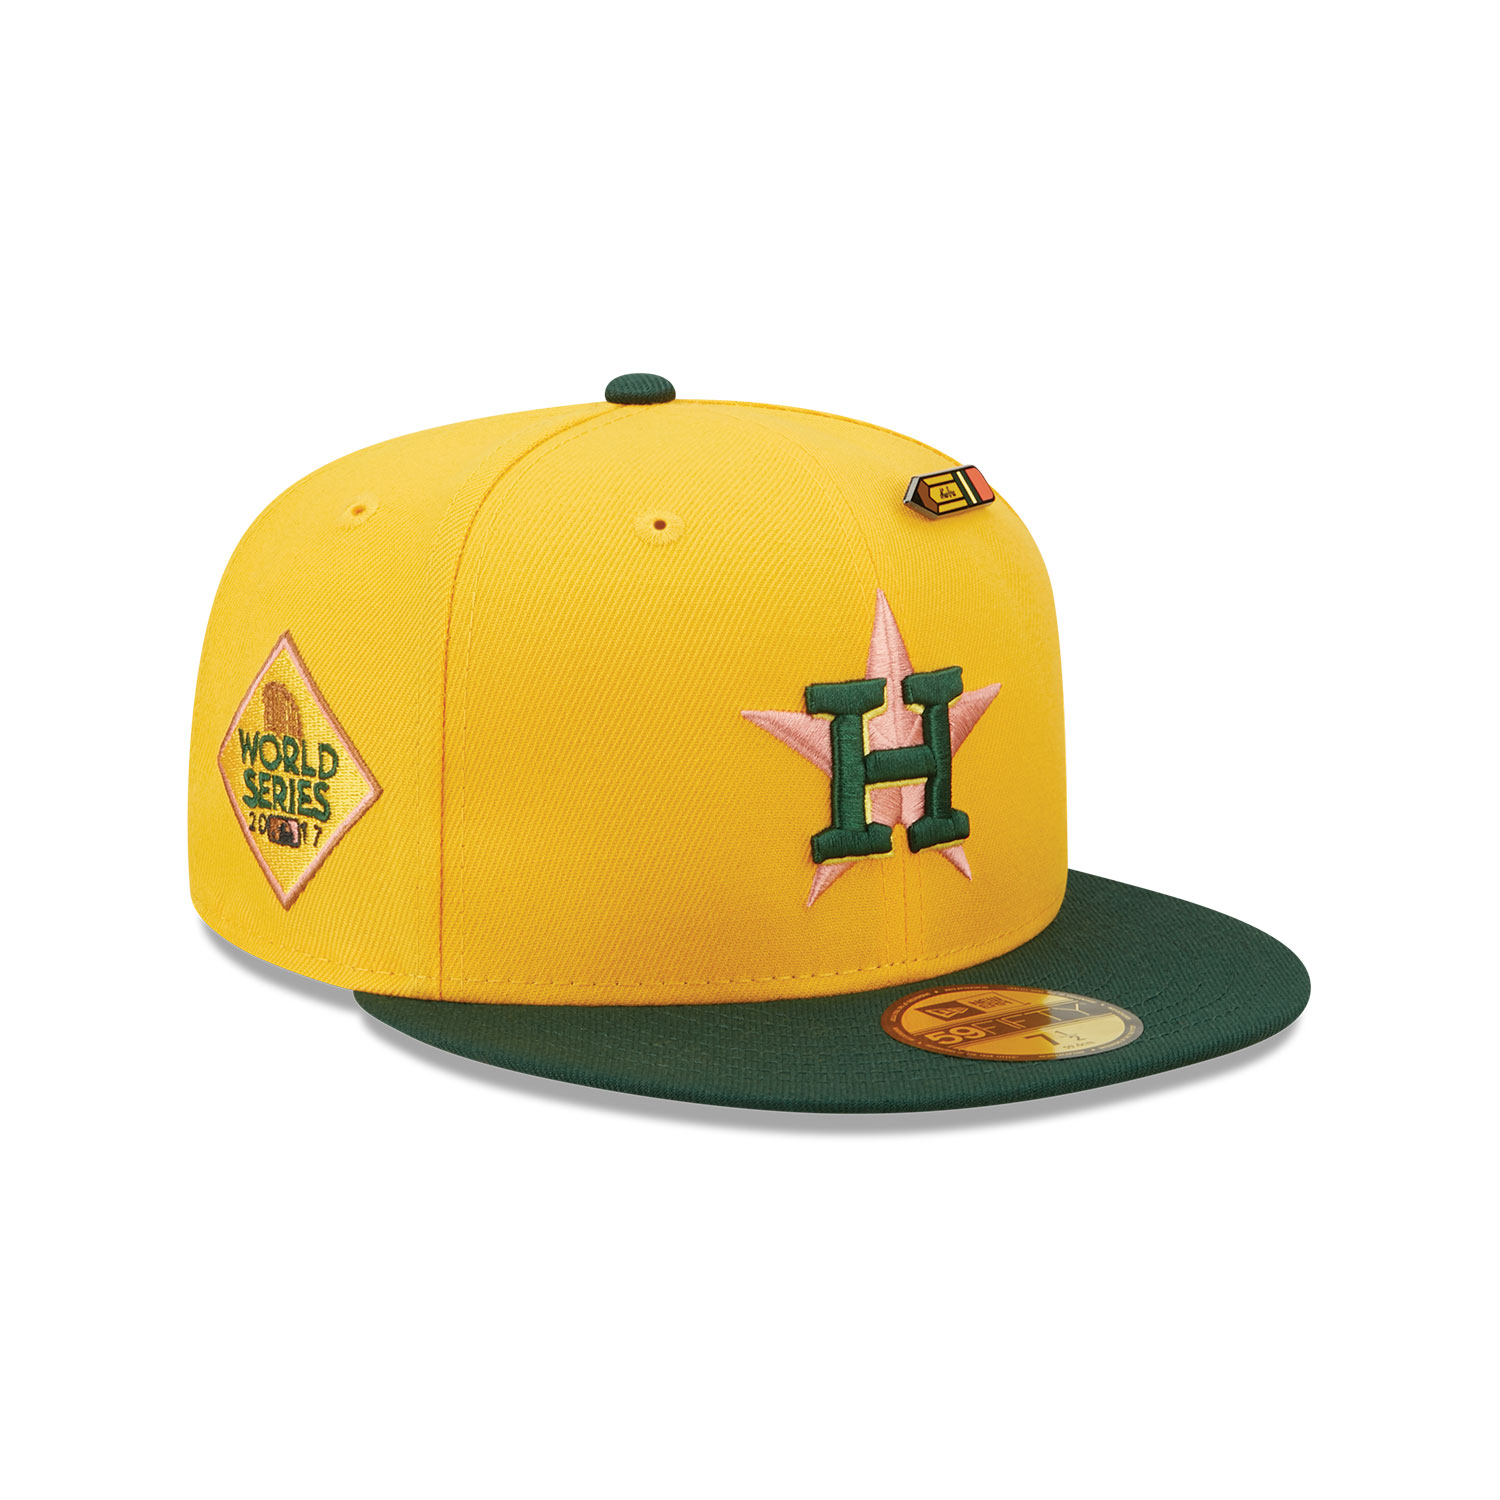 Houston Astros Back to School Yellow 59FIFTY Fitted Cap